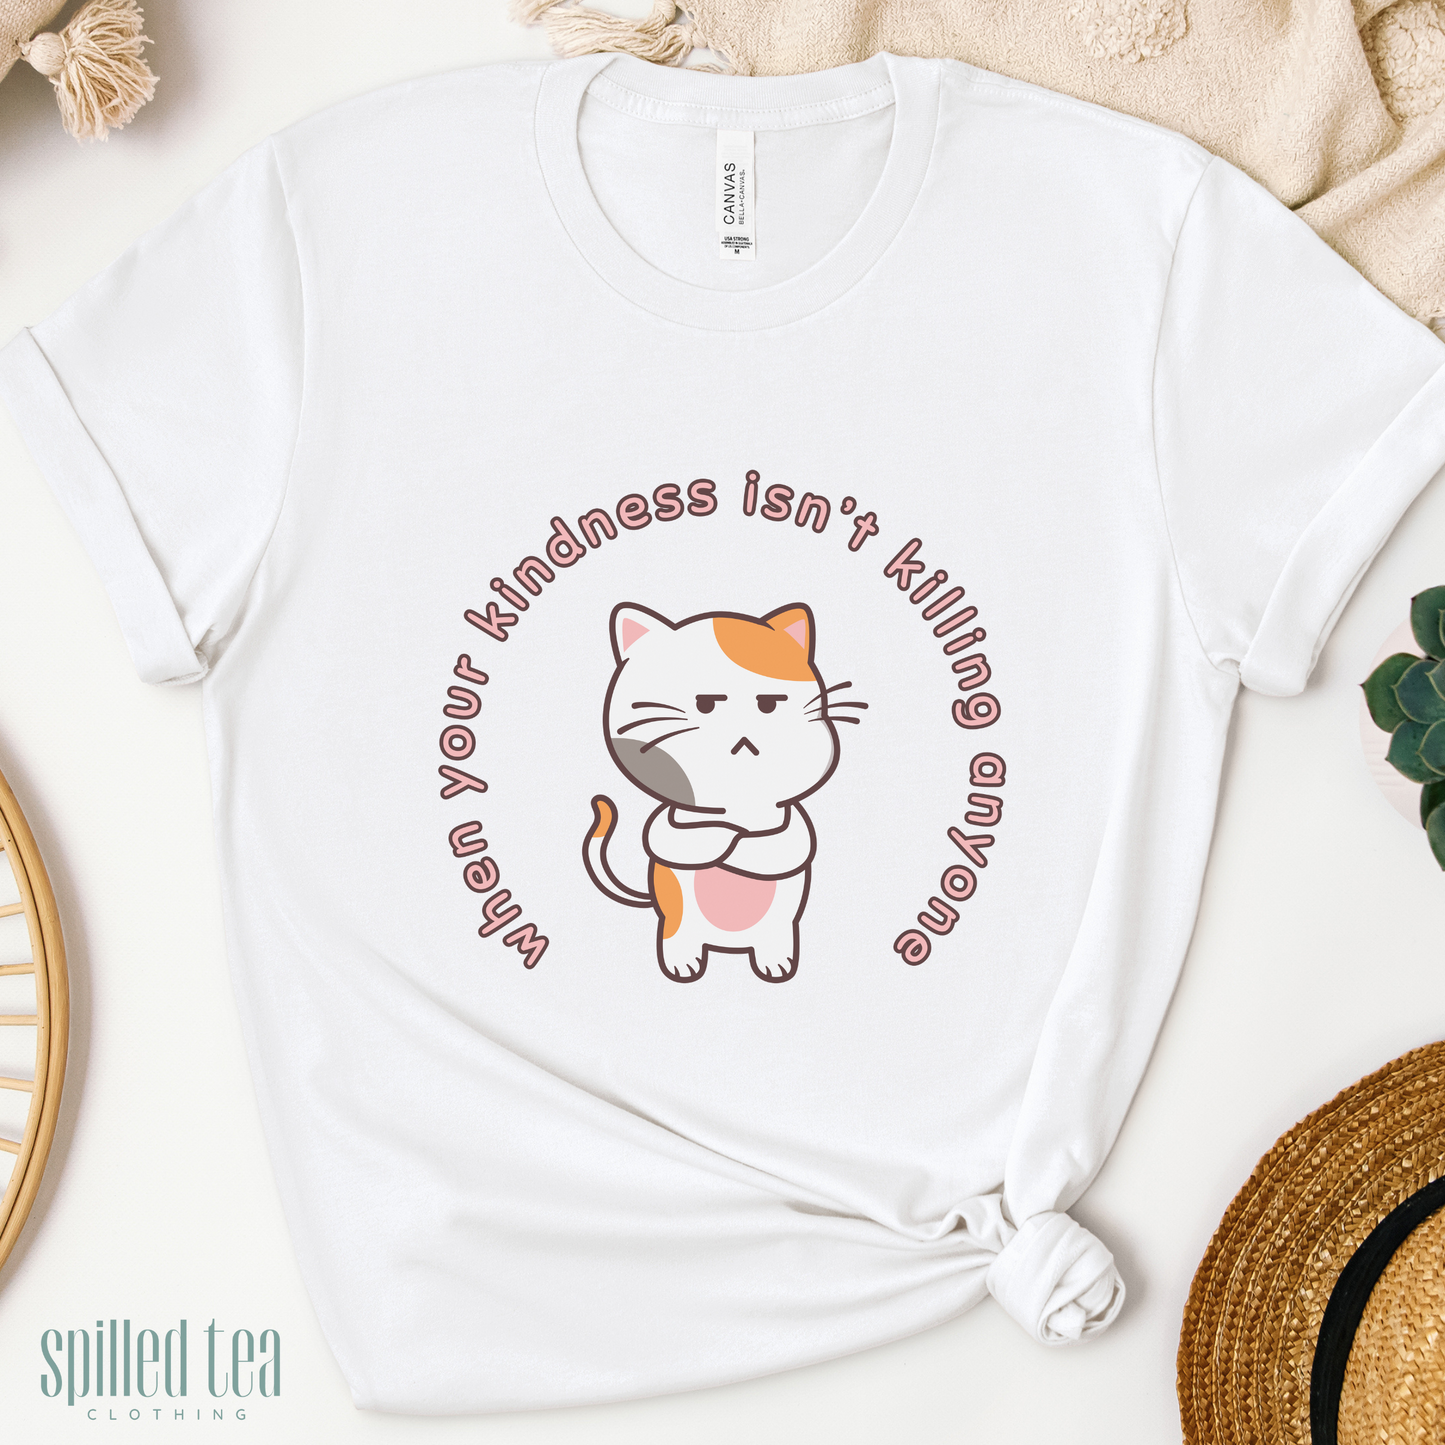 When Your Kindness Isn't Killing Anyone T-Shirt